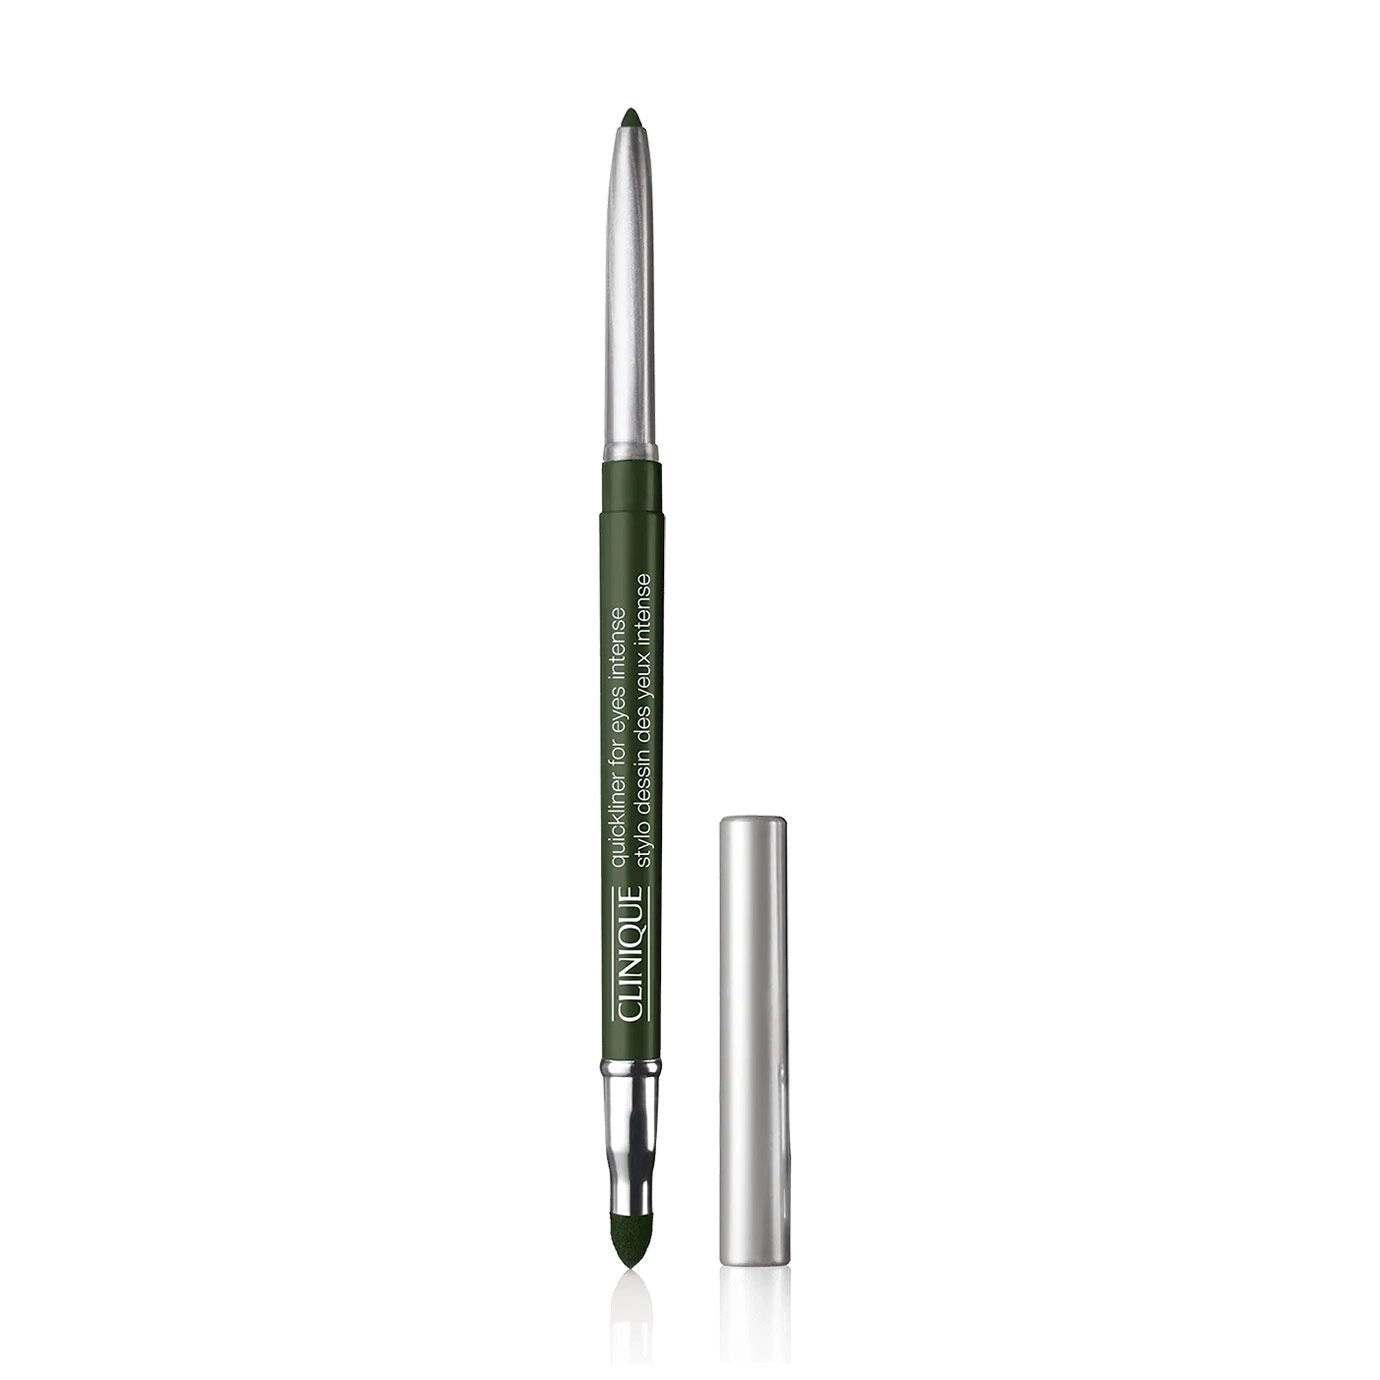 Clinique Карандаш для глаз Quickliner For Eyes Intense 07 Intense Ivy, 0.28 г - фото N1